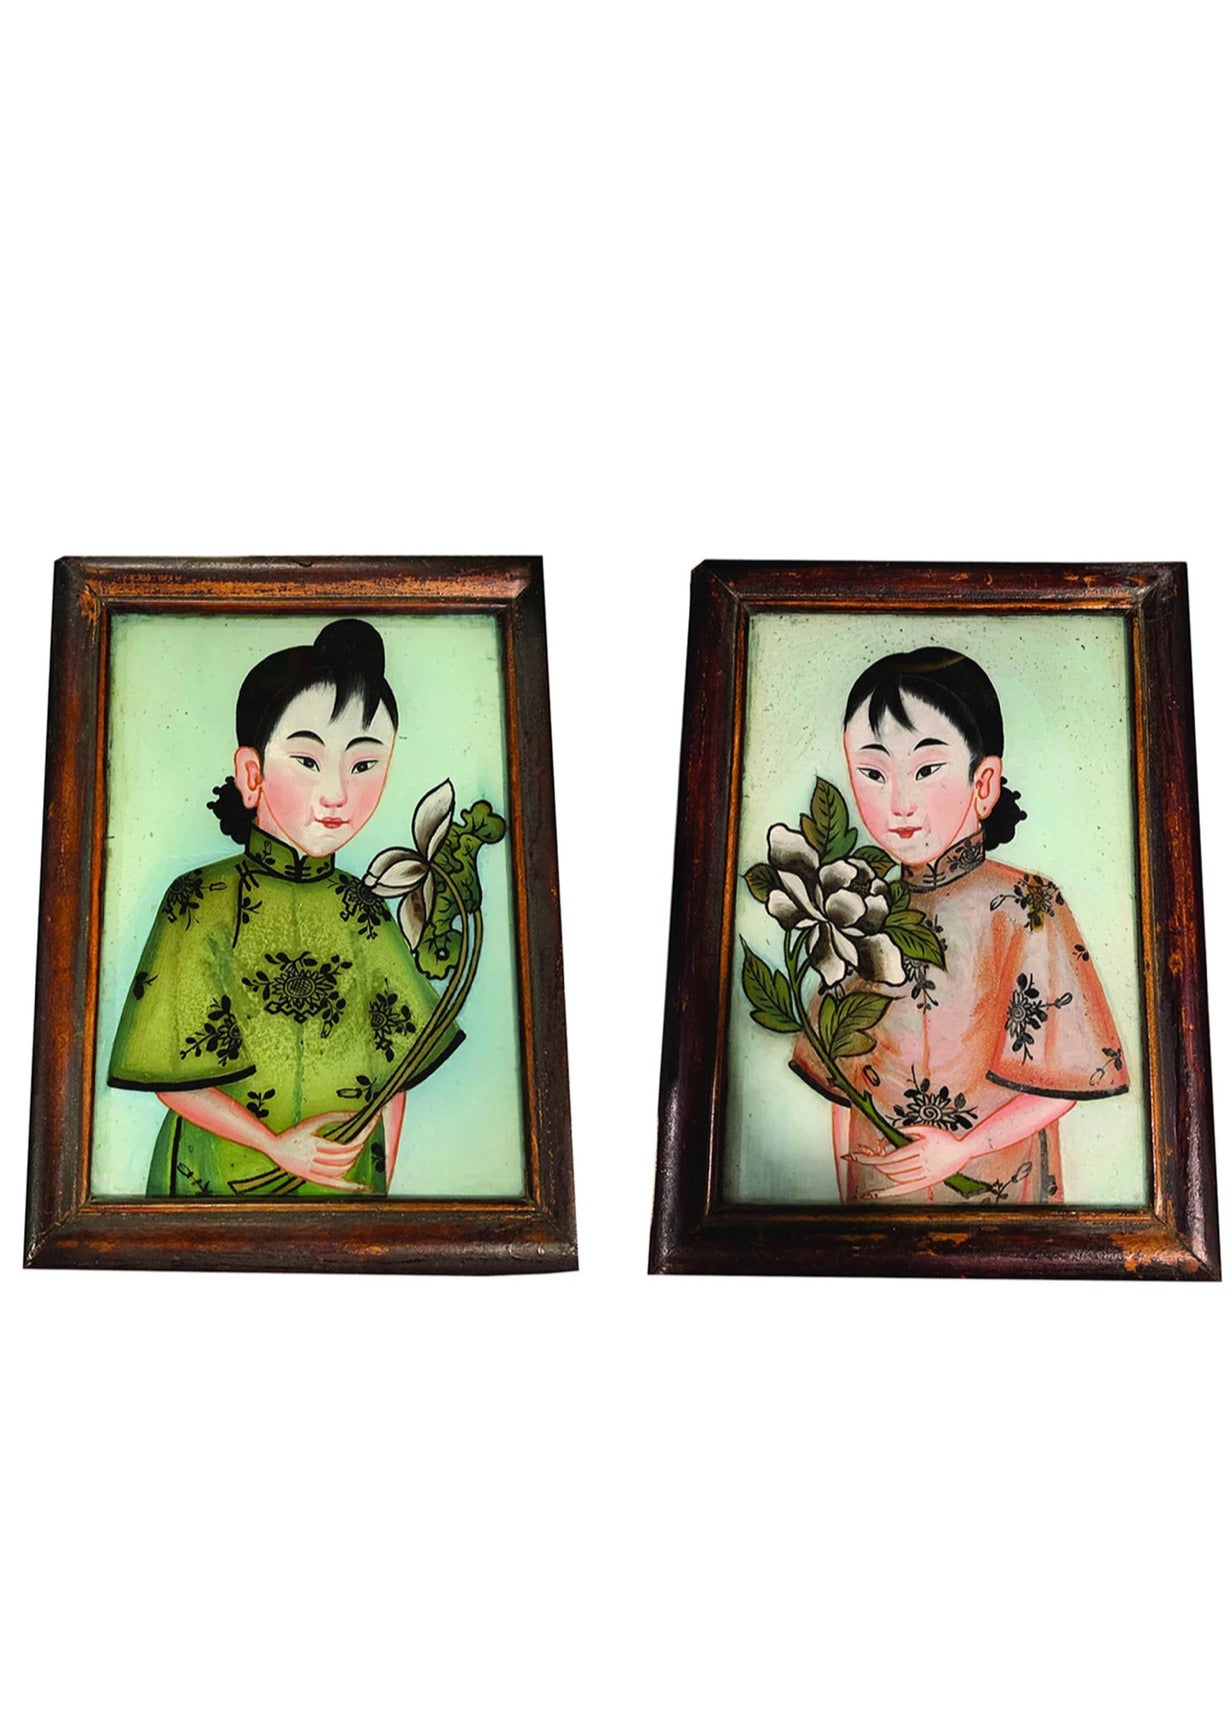 PAIR OF 19TH CENTURY CHINESE REVERSE GLASS PAINTINGS OF SISTERS - Home - Libertine